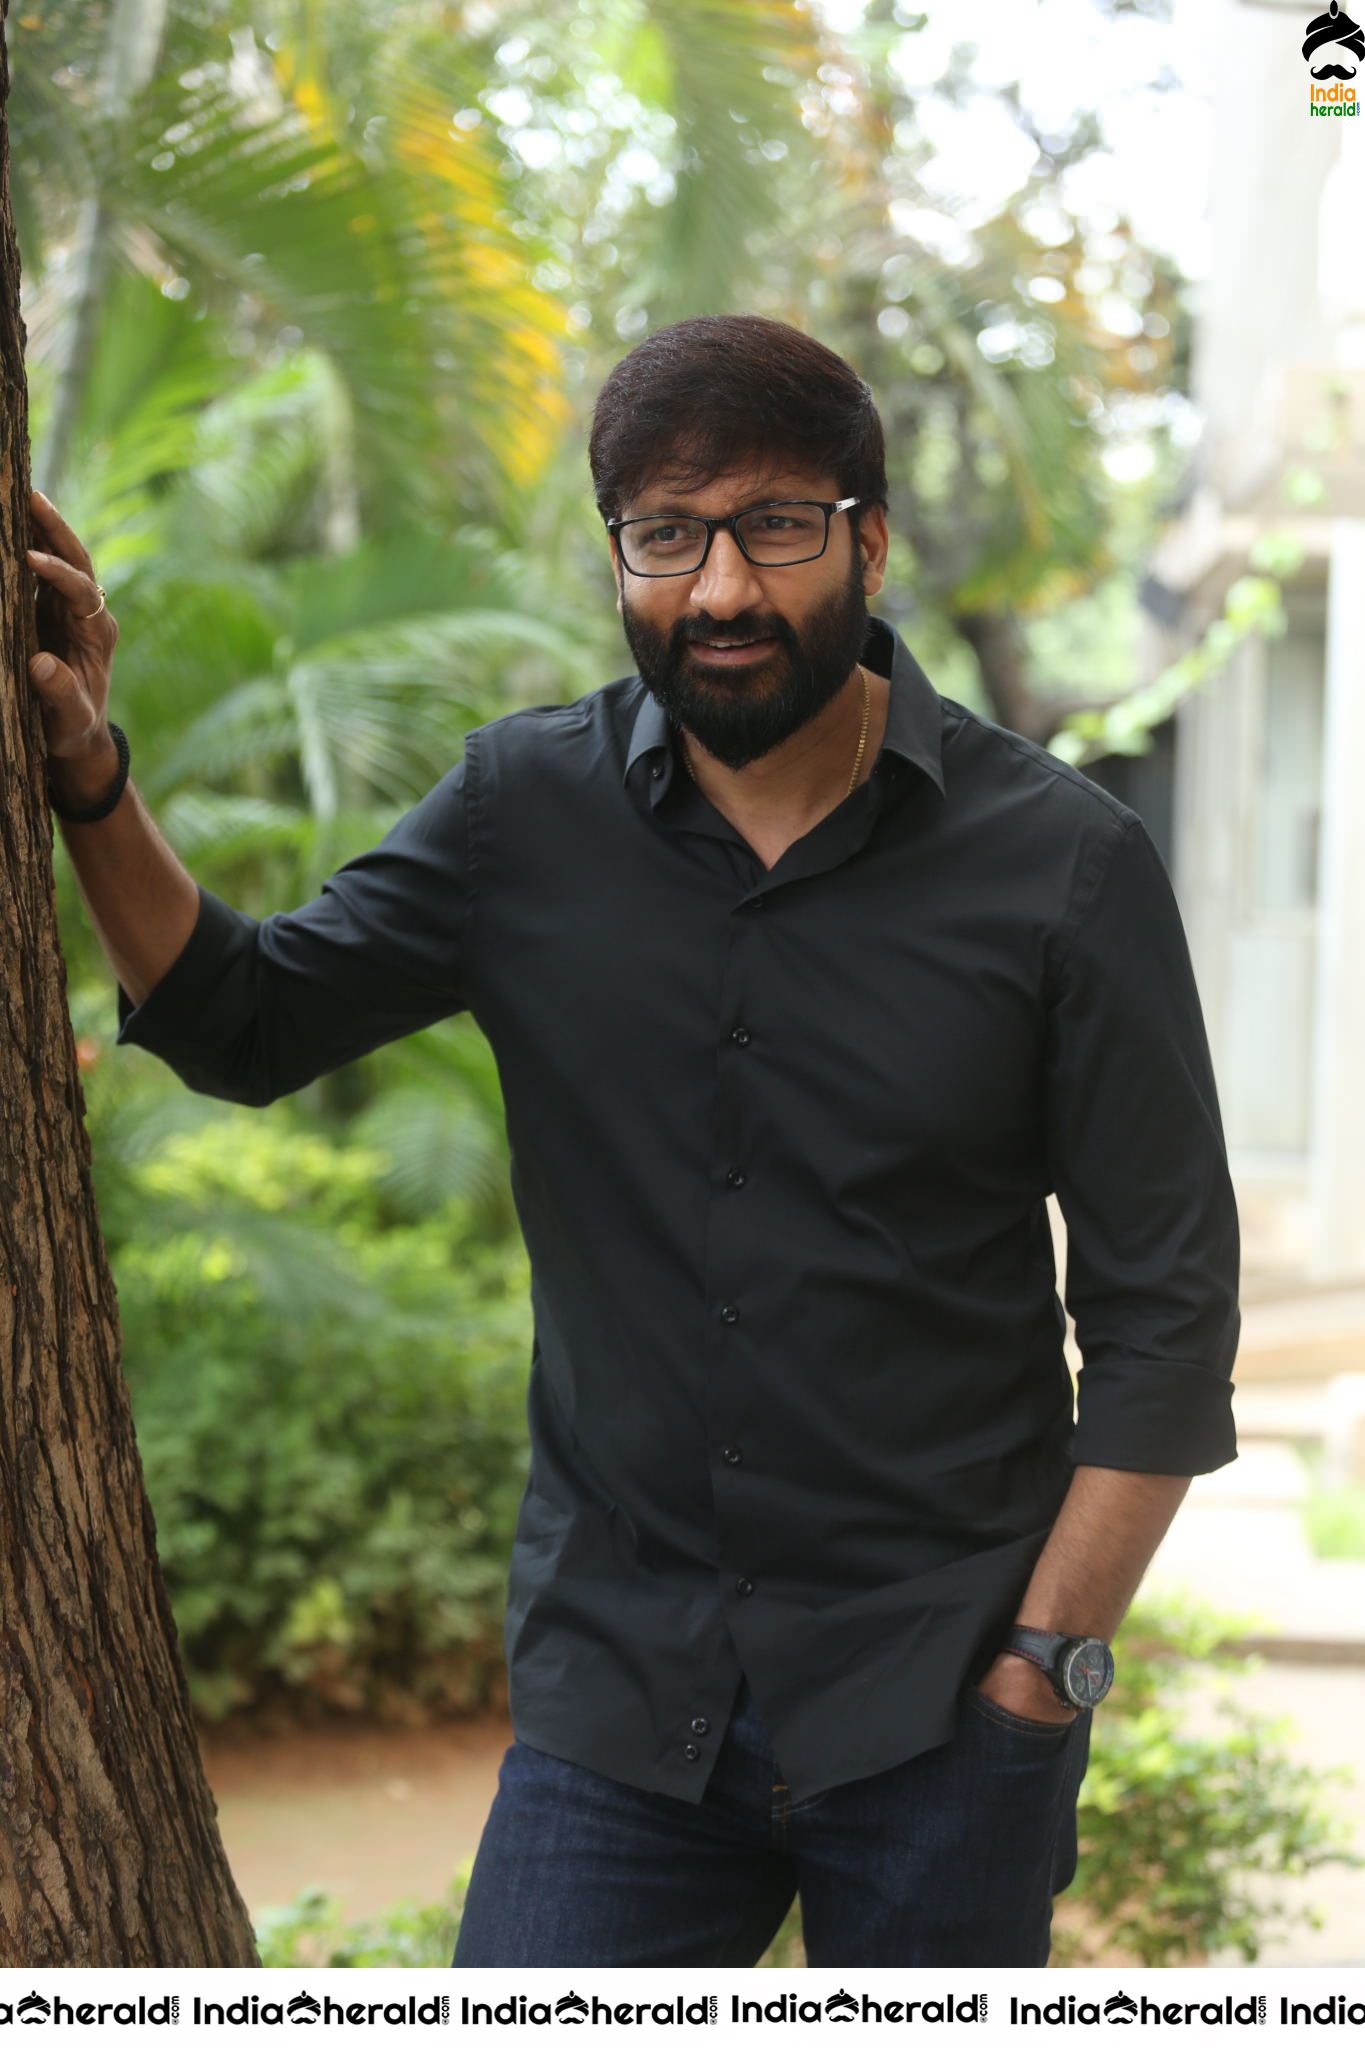 Actor Gopichand Latest Clicks with Nerd Glasses and Thick Beard Set 2